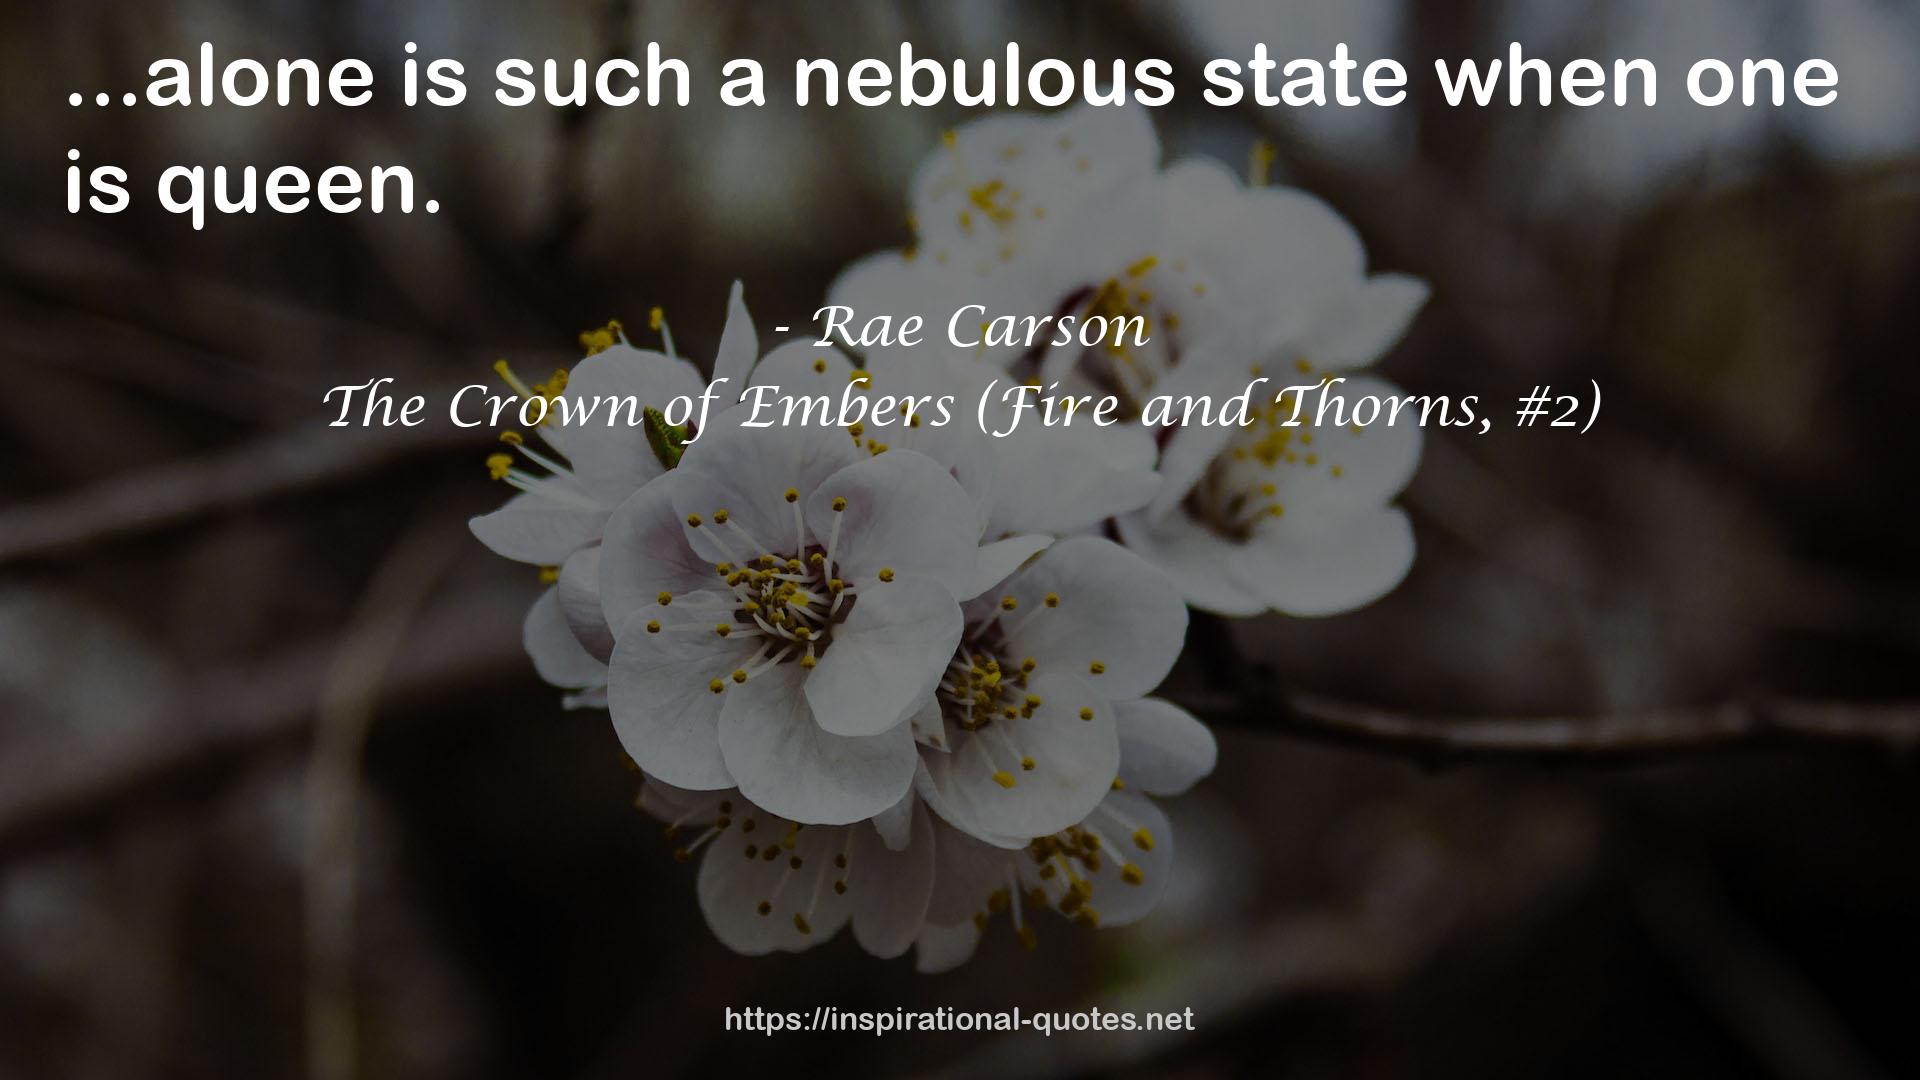 The Crown of Embers (Fire and Thorns, #2) QUOTES